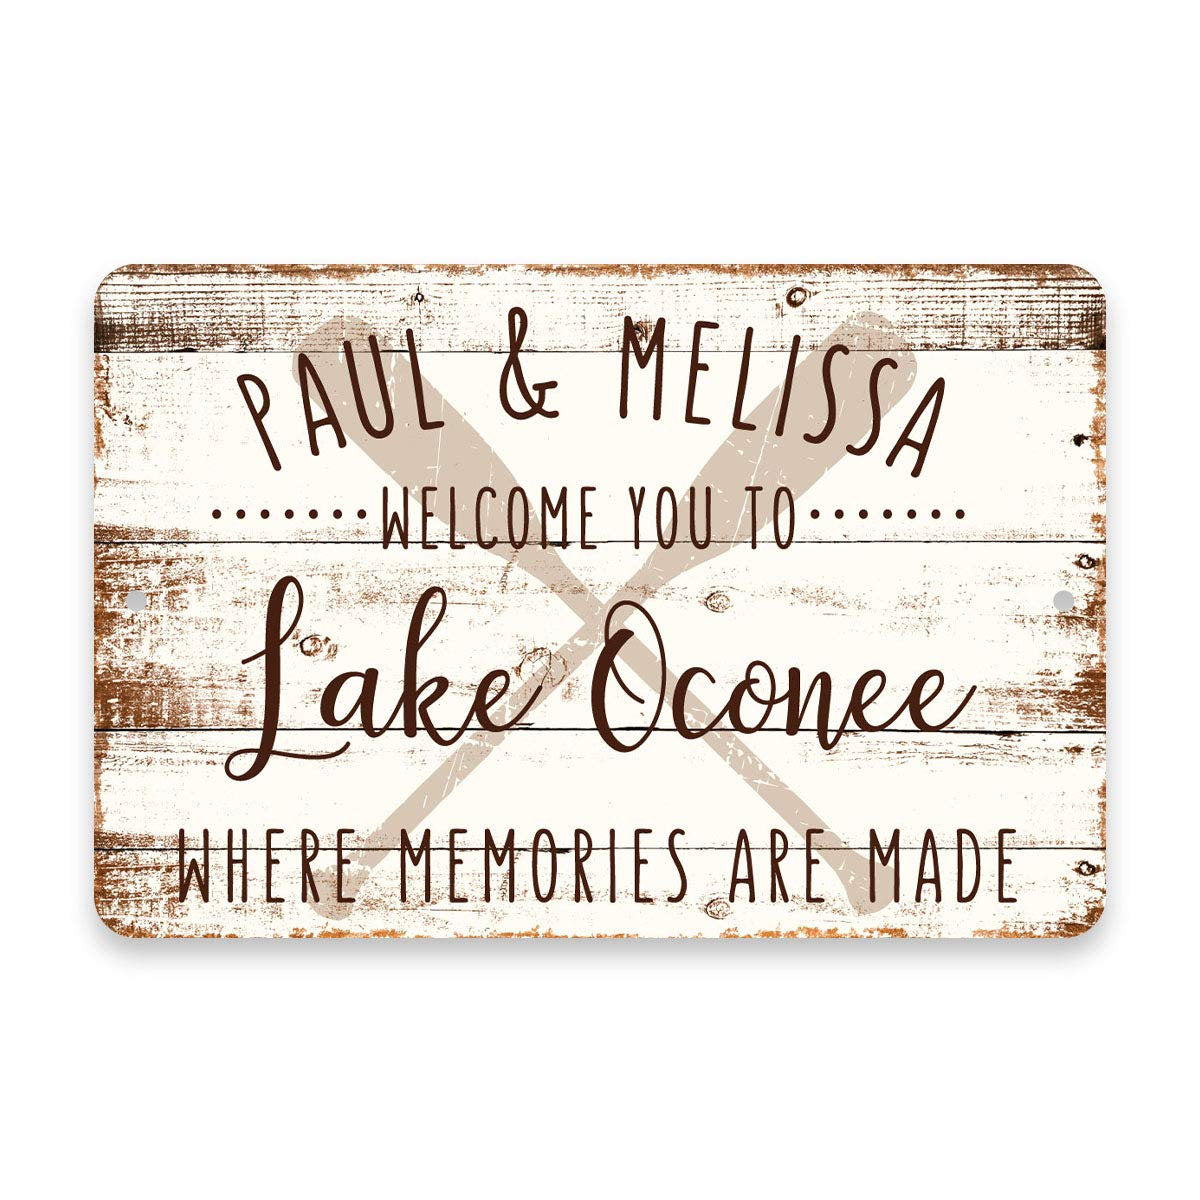 Personalized Welcome to Lake Oconee Where Memories are Made Sign - 8 X 12 Metal Sign with Wood Look